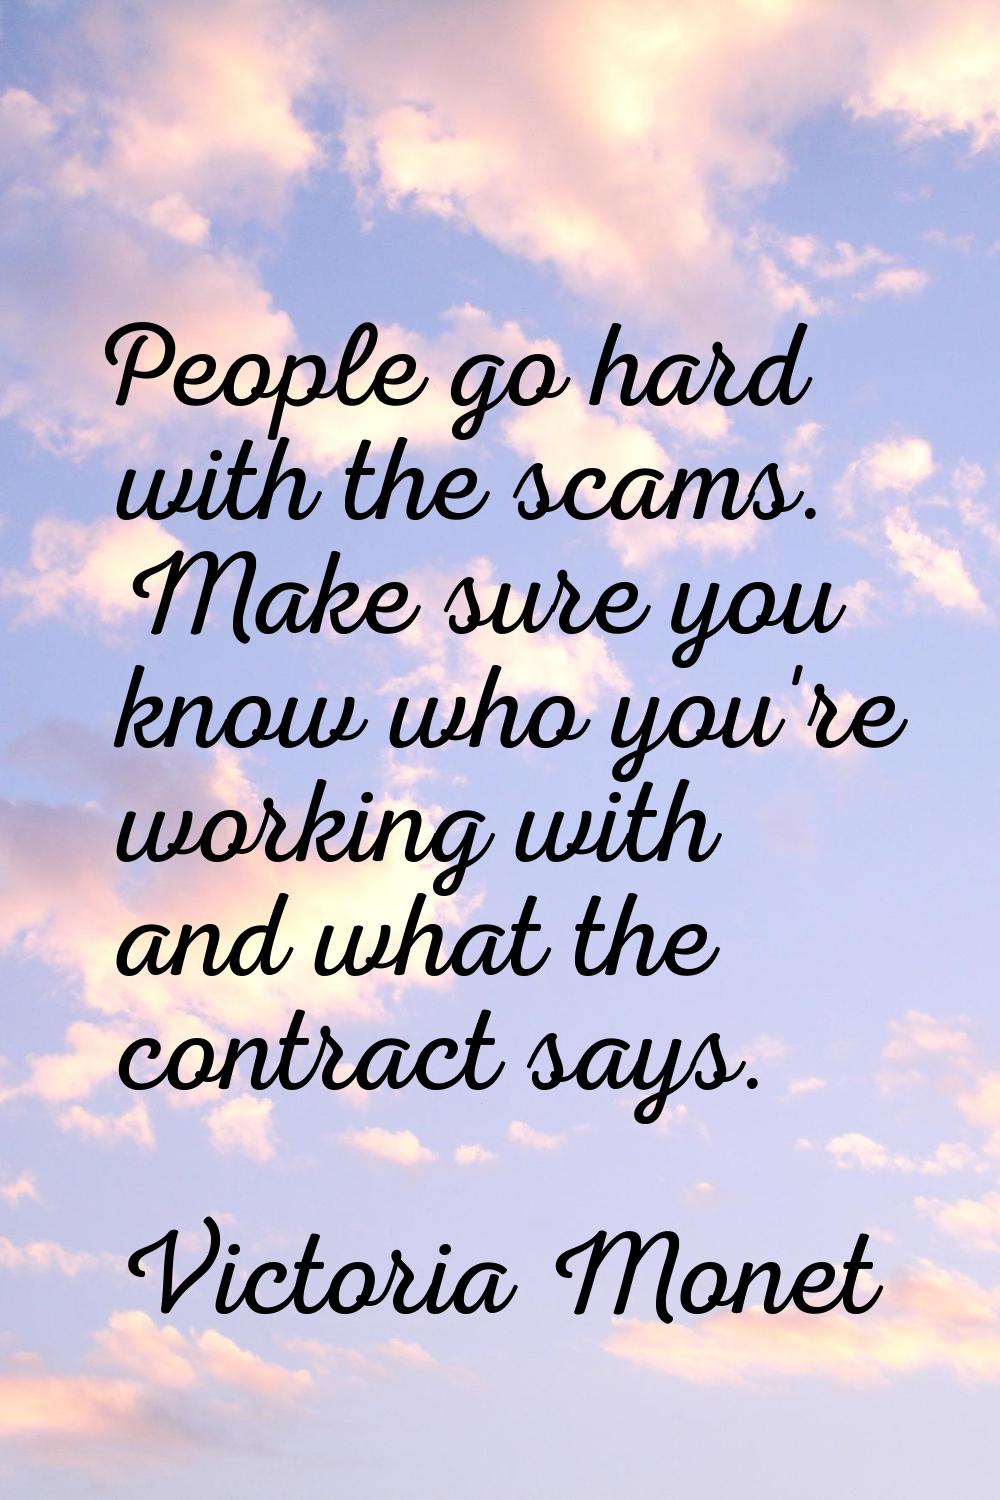 People go hard with the scams. Make sure you know who you're working with and what the contract say